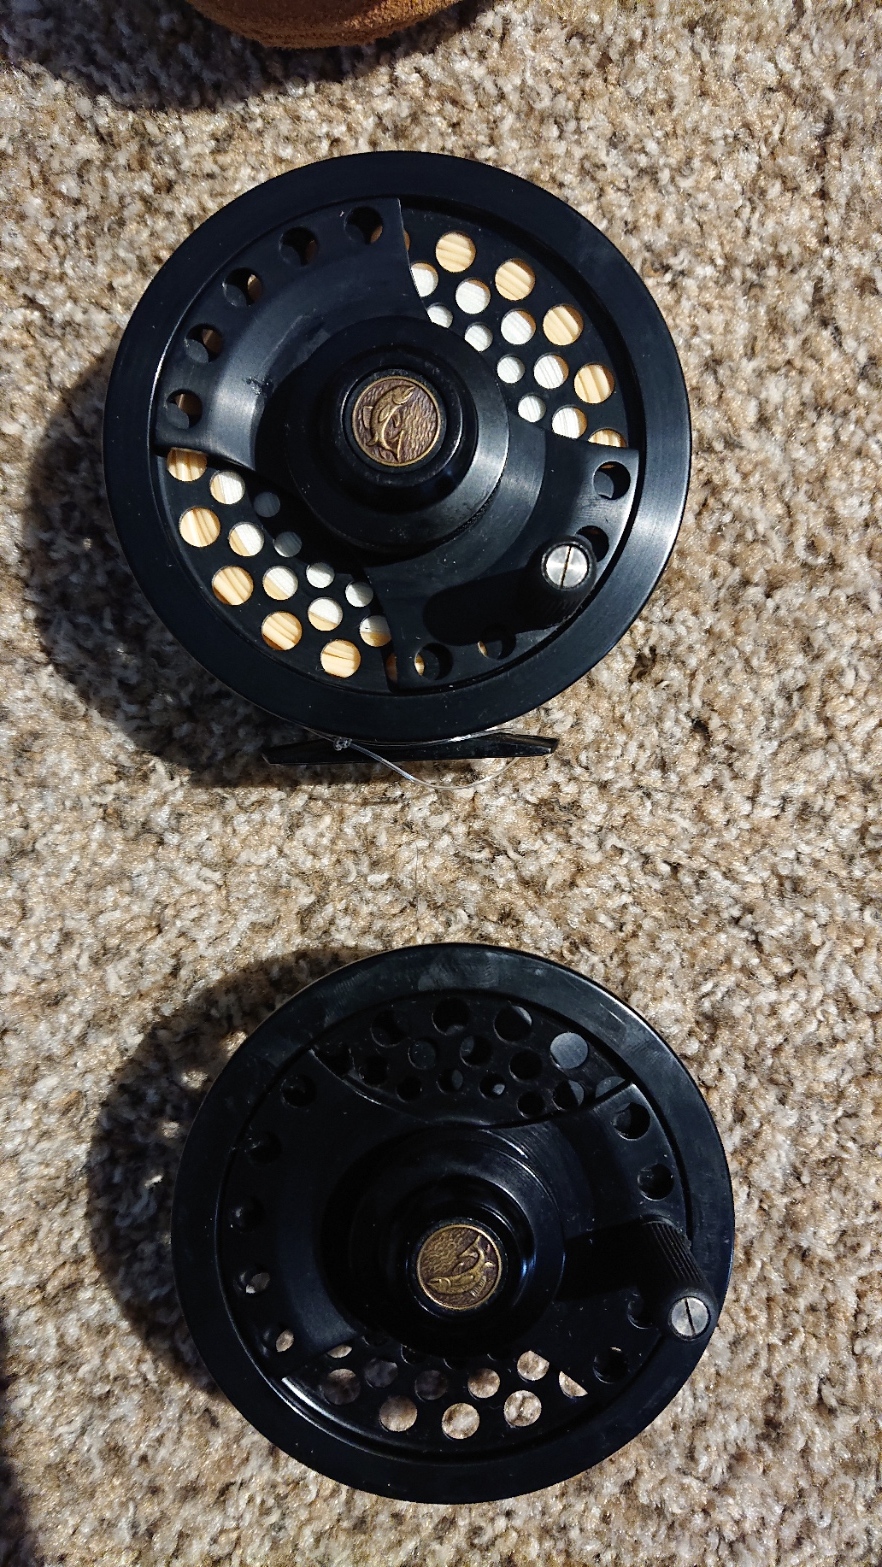 Orvis - S/S/S 6/7 Antireverse Fly Reel w/ 2 Spare Spools